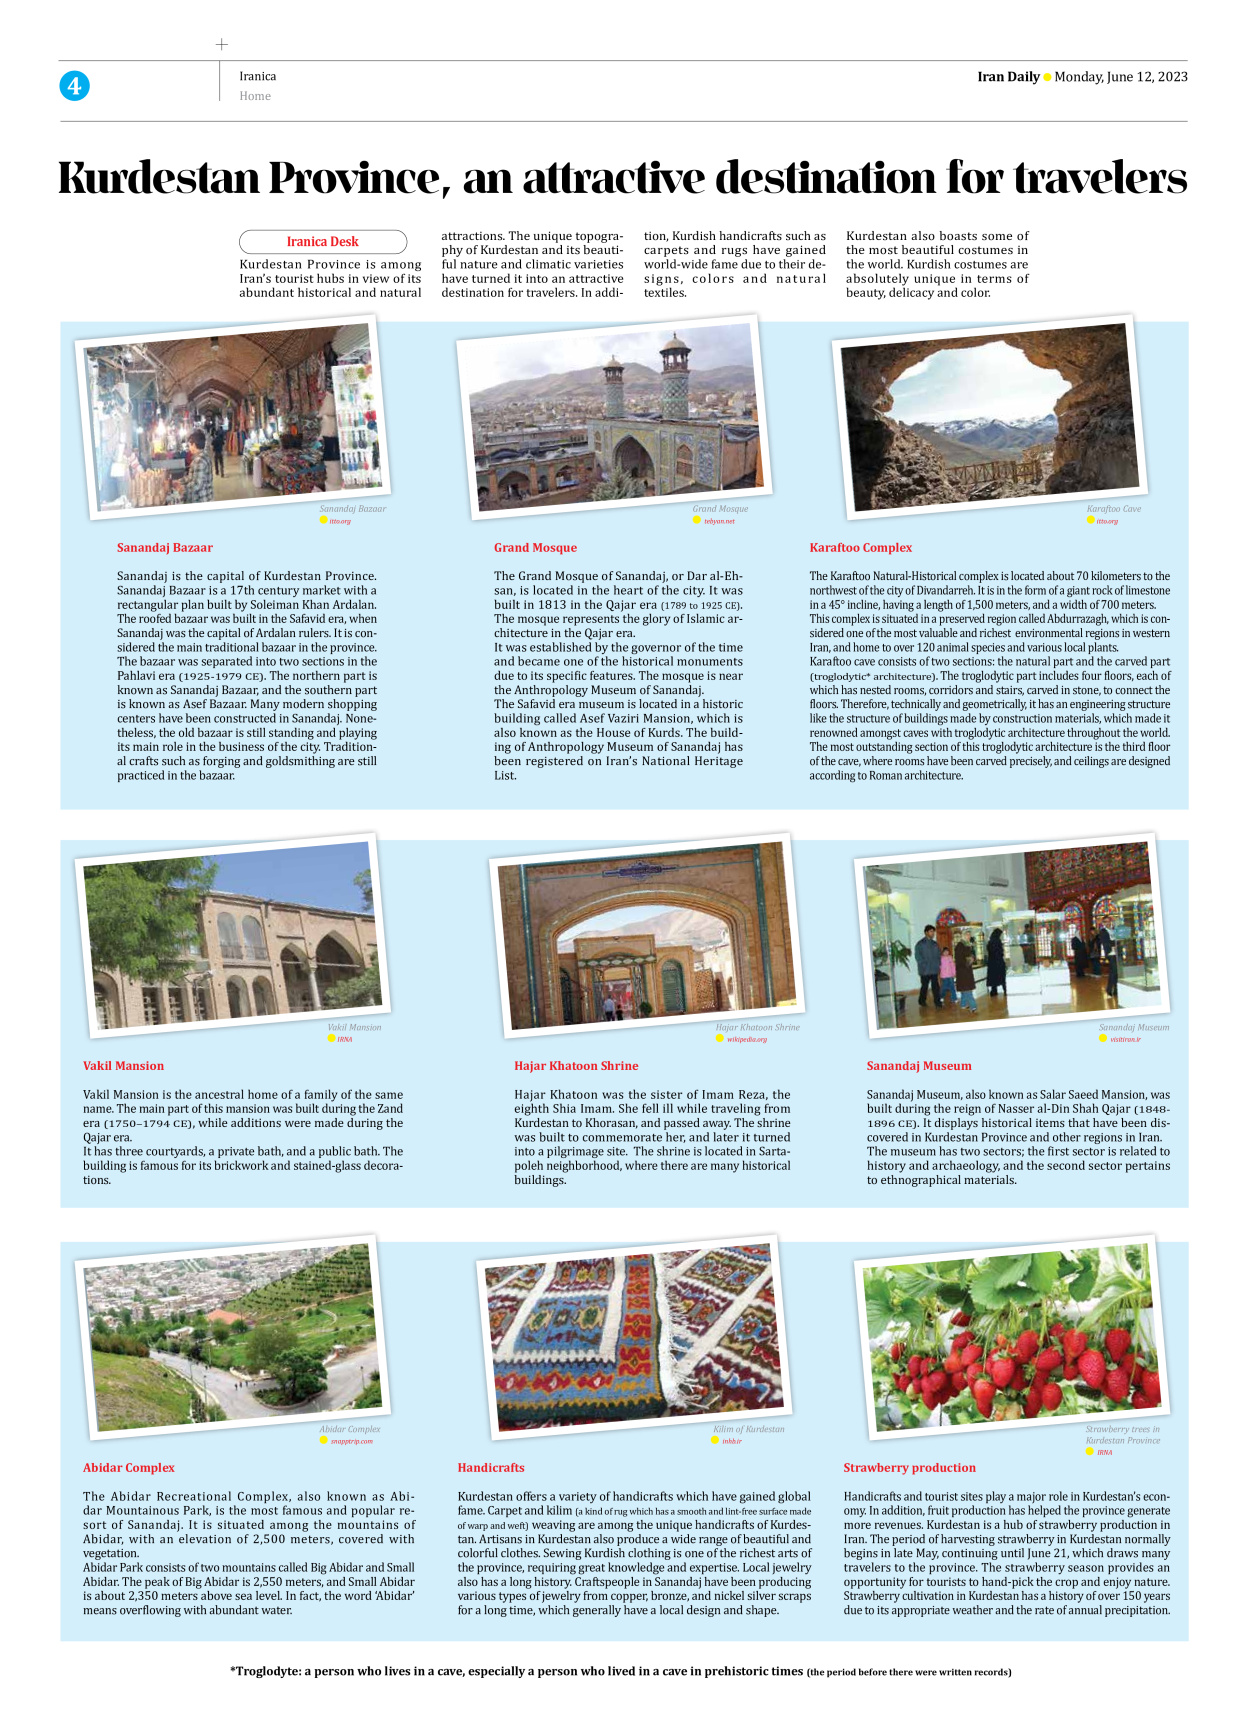 Iran Daily - Number Seven Thousand Three Hundred and Twelve - 12 June 2023 - Page 4